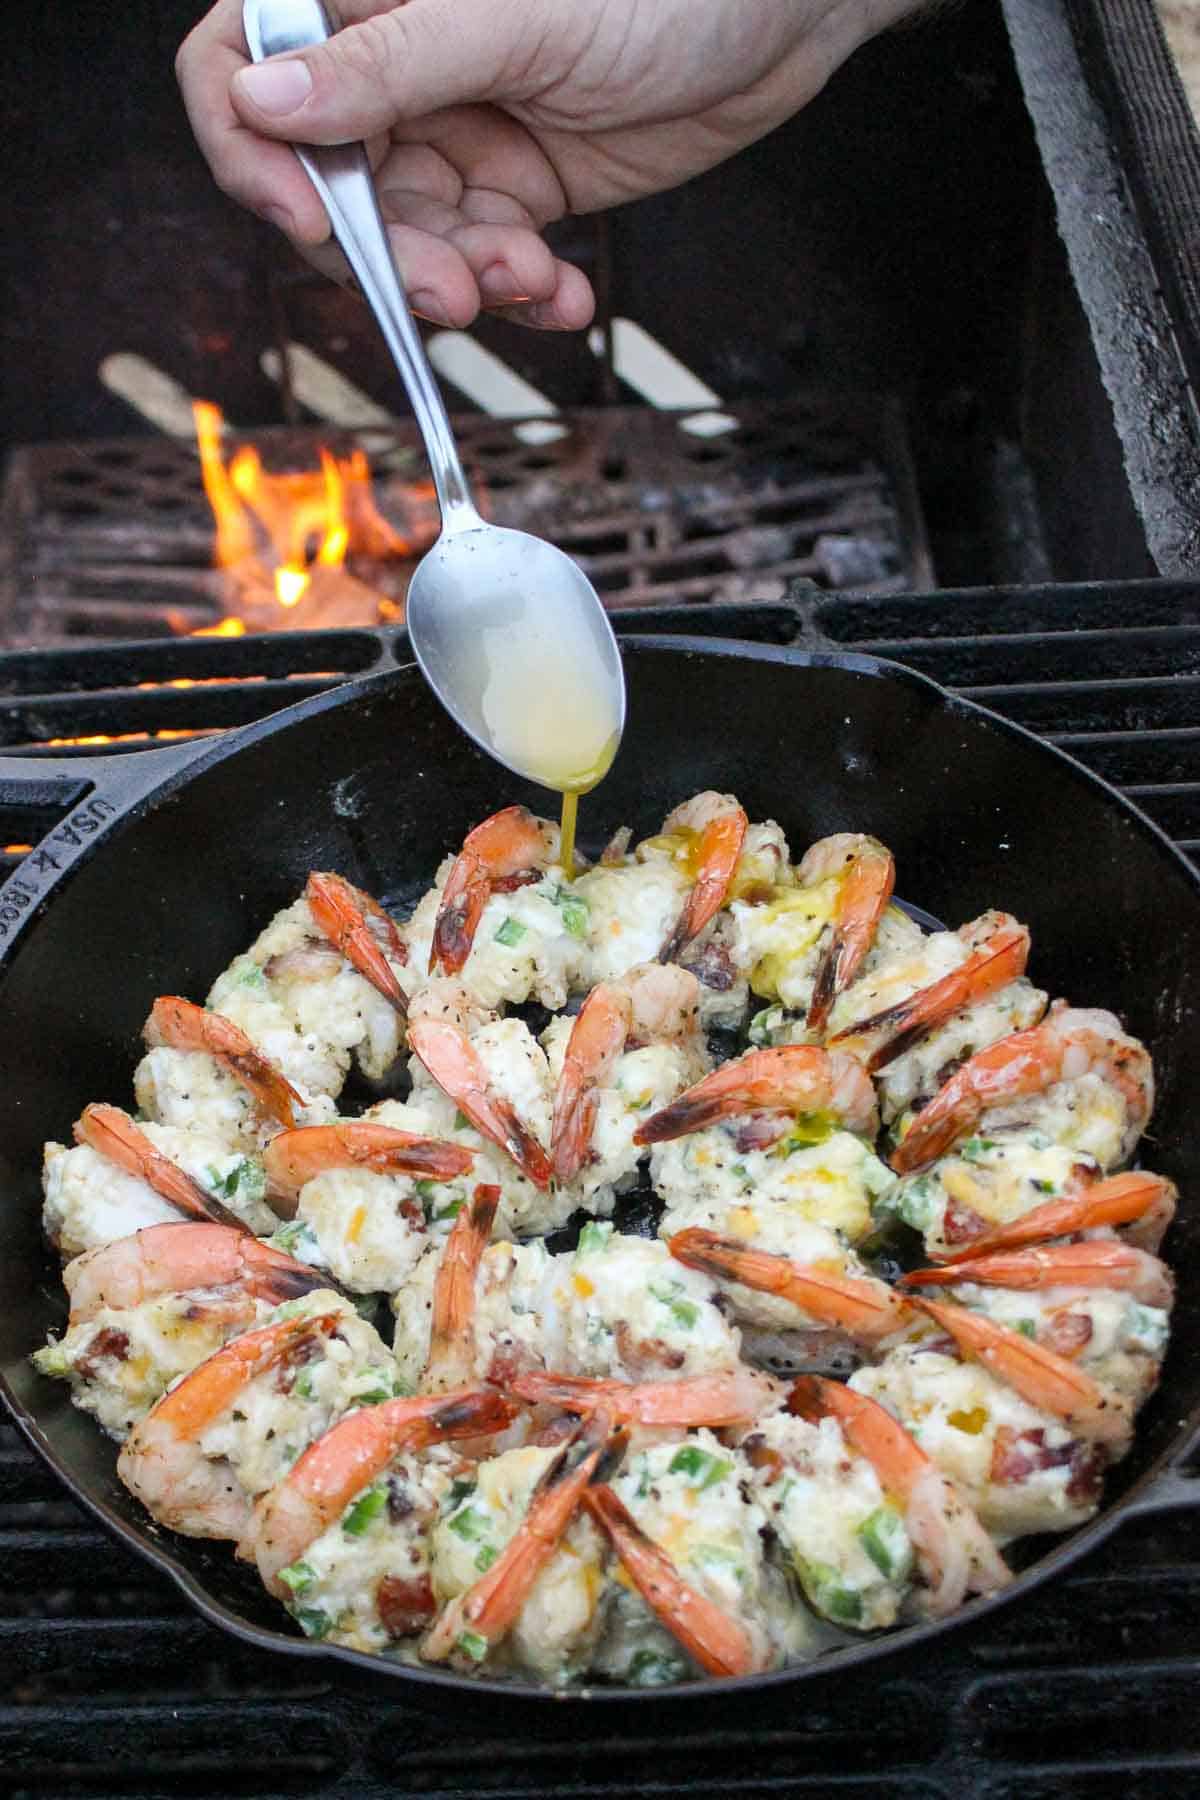 Some melted butter is drizzled over the shrimp halfway through cooking. 